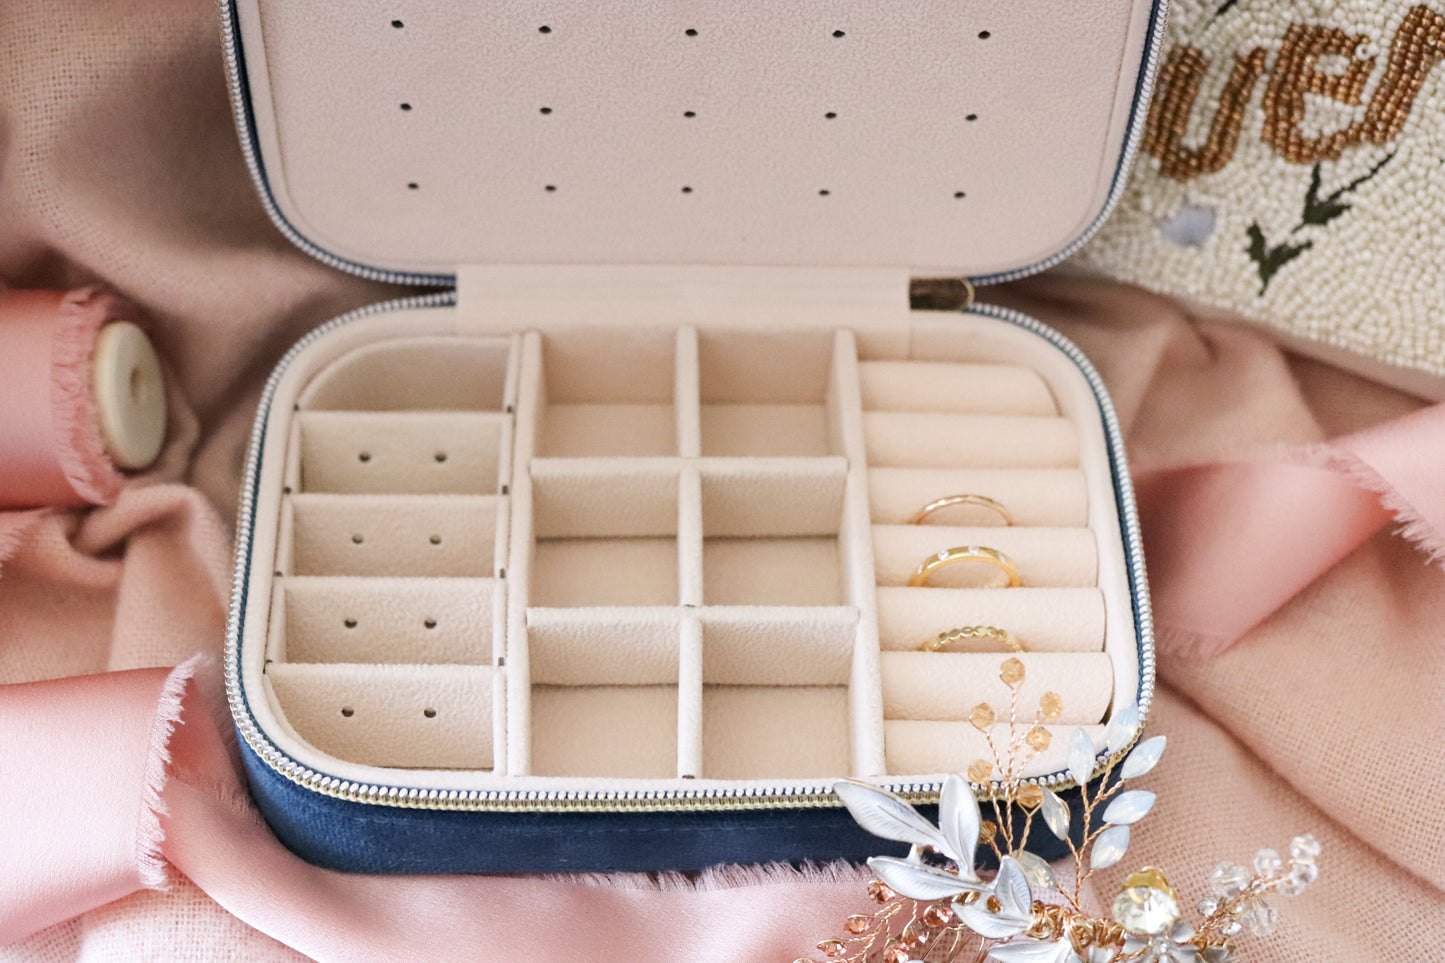 YOU CAN FLY RECTANGLE JEWELRY CASE